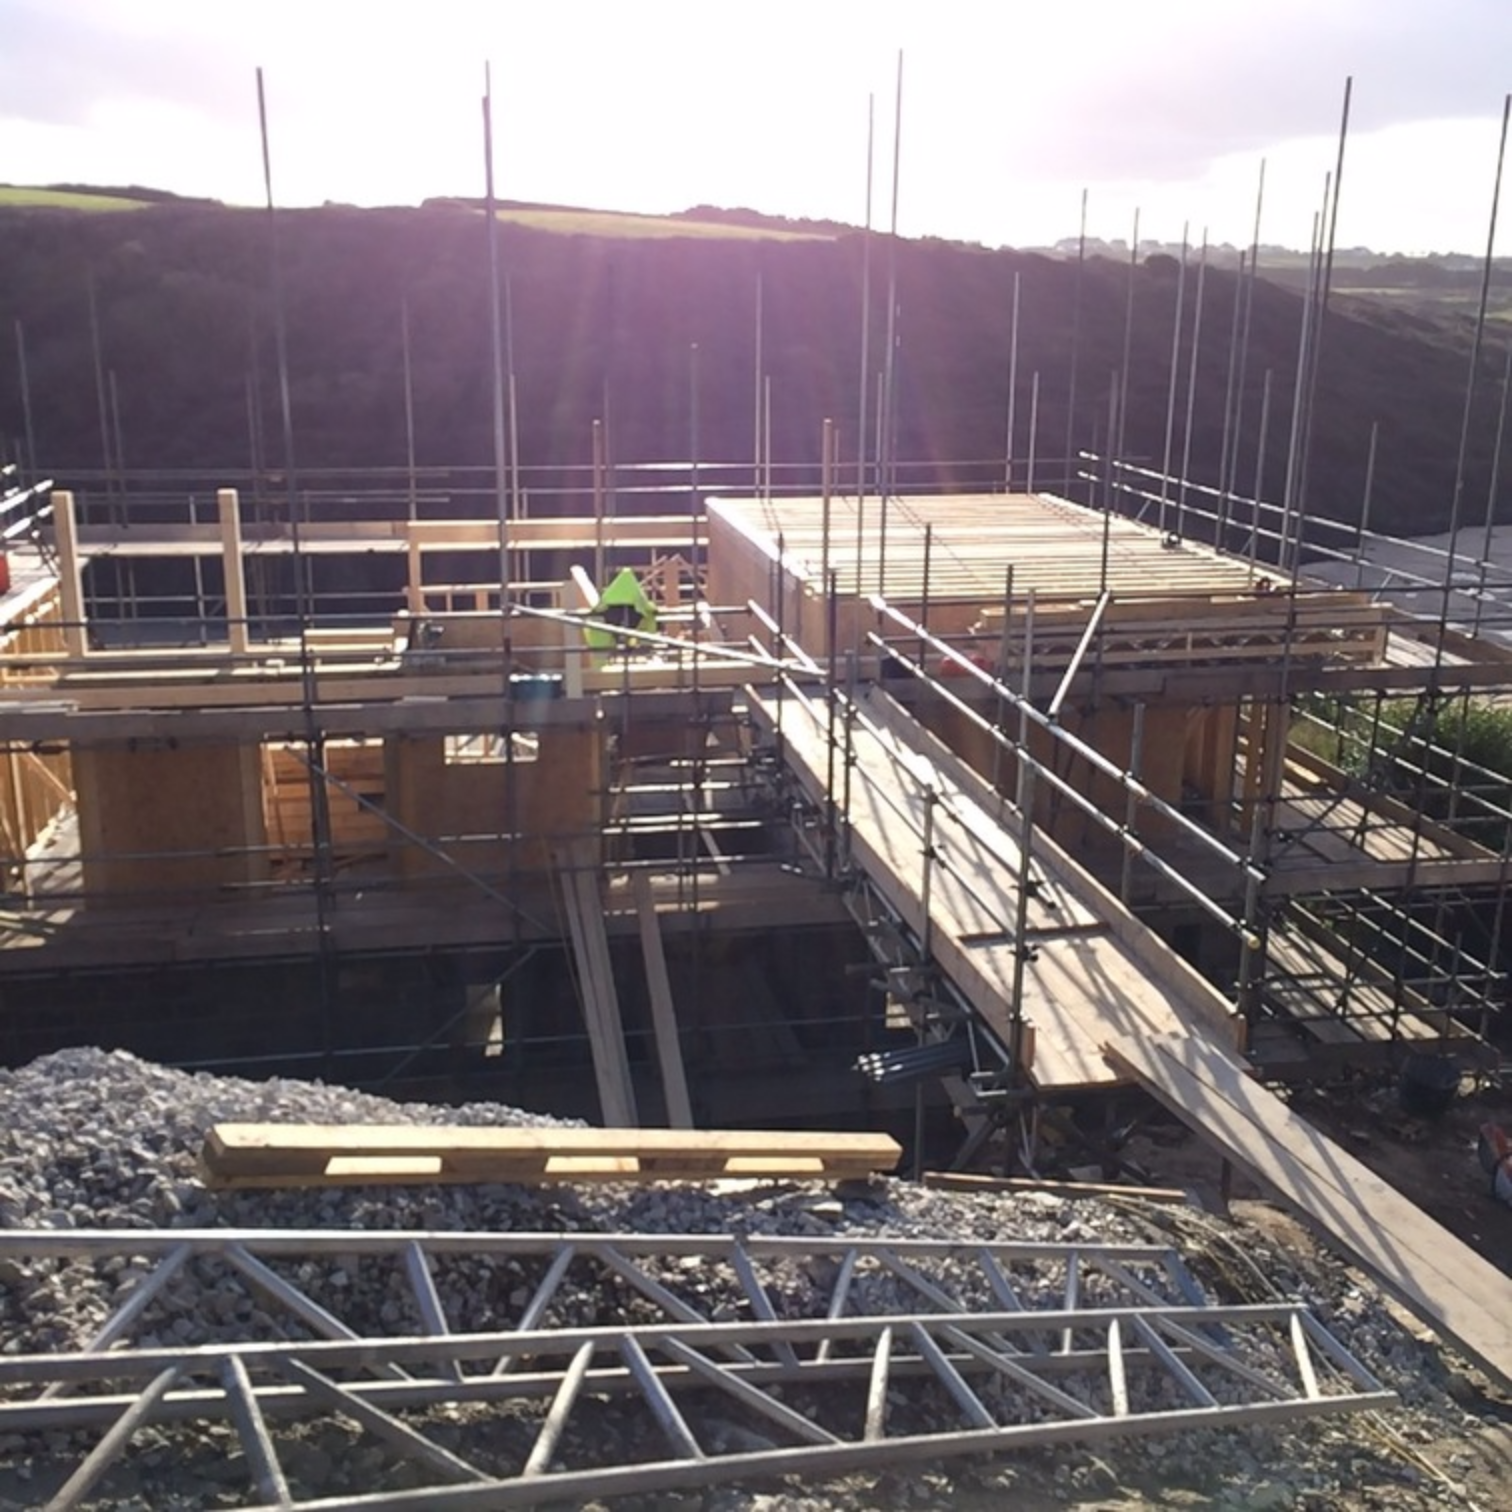 Timber frame, elevated views over river Pentire